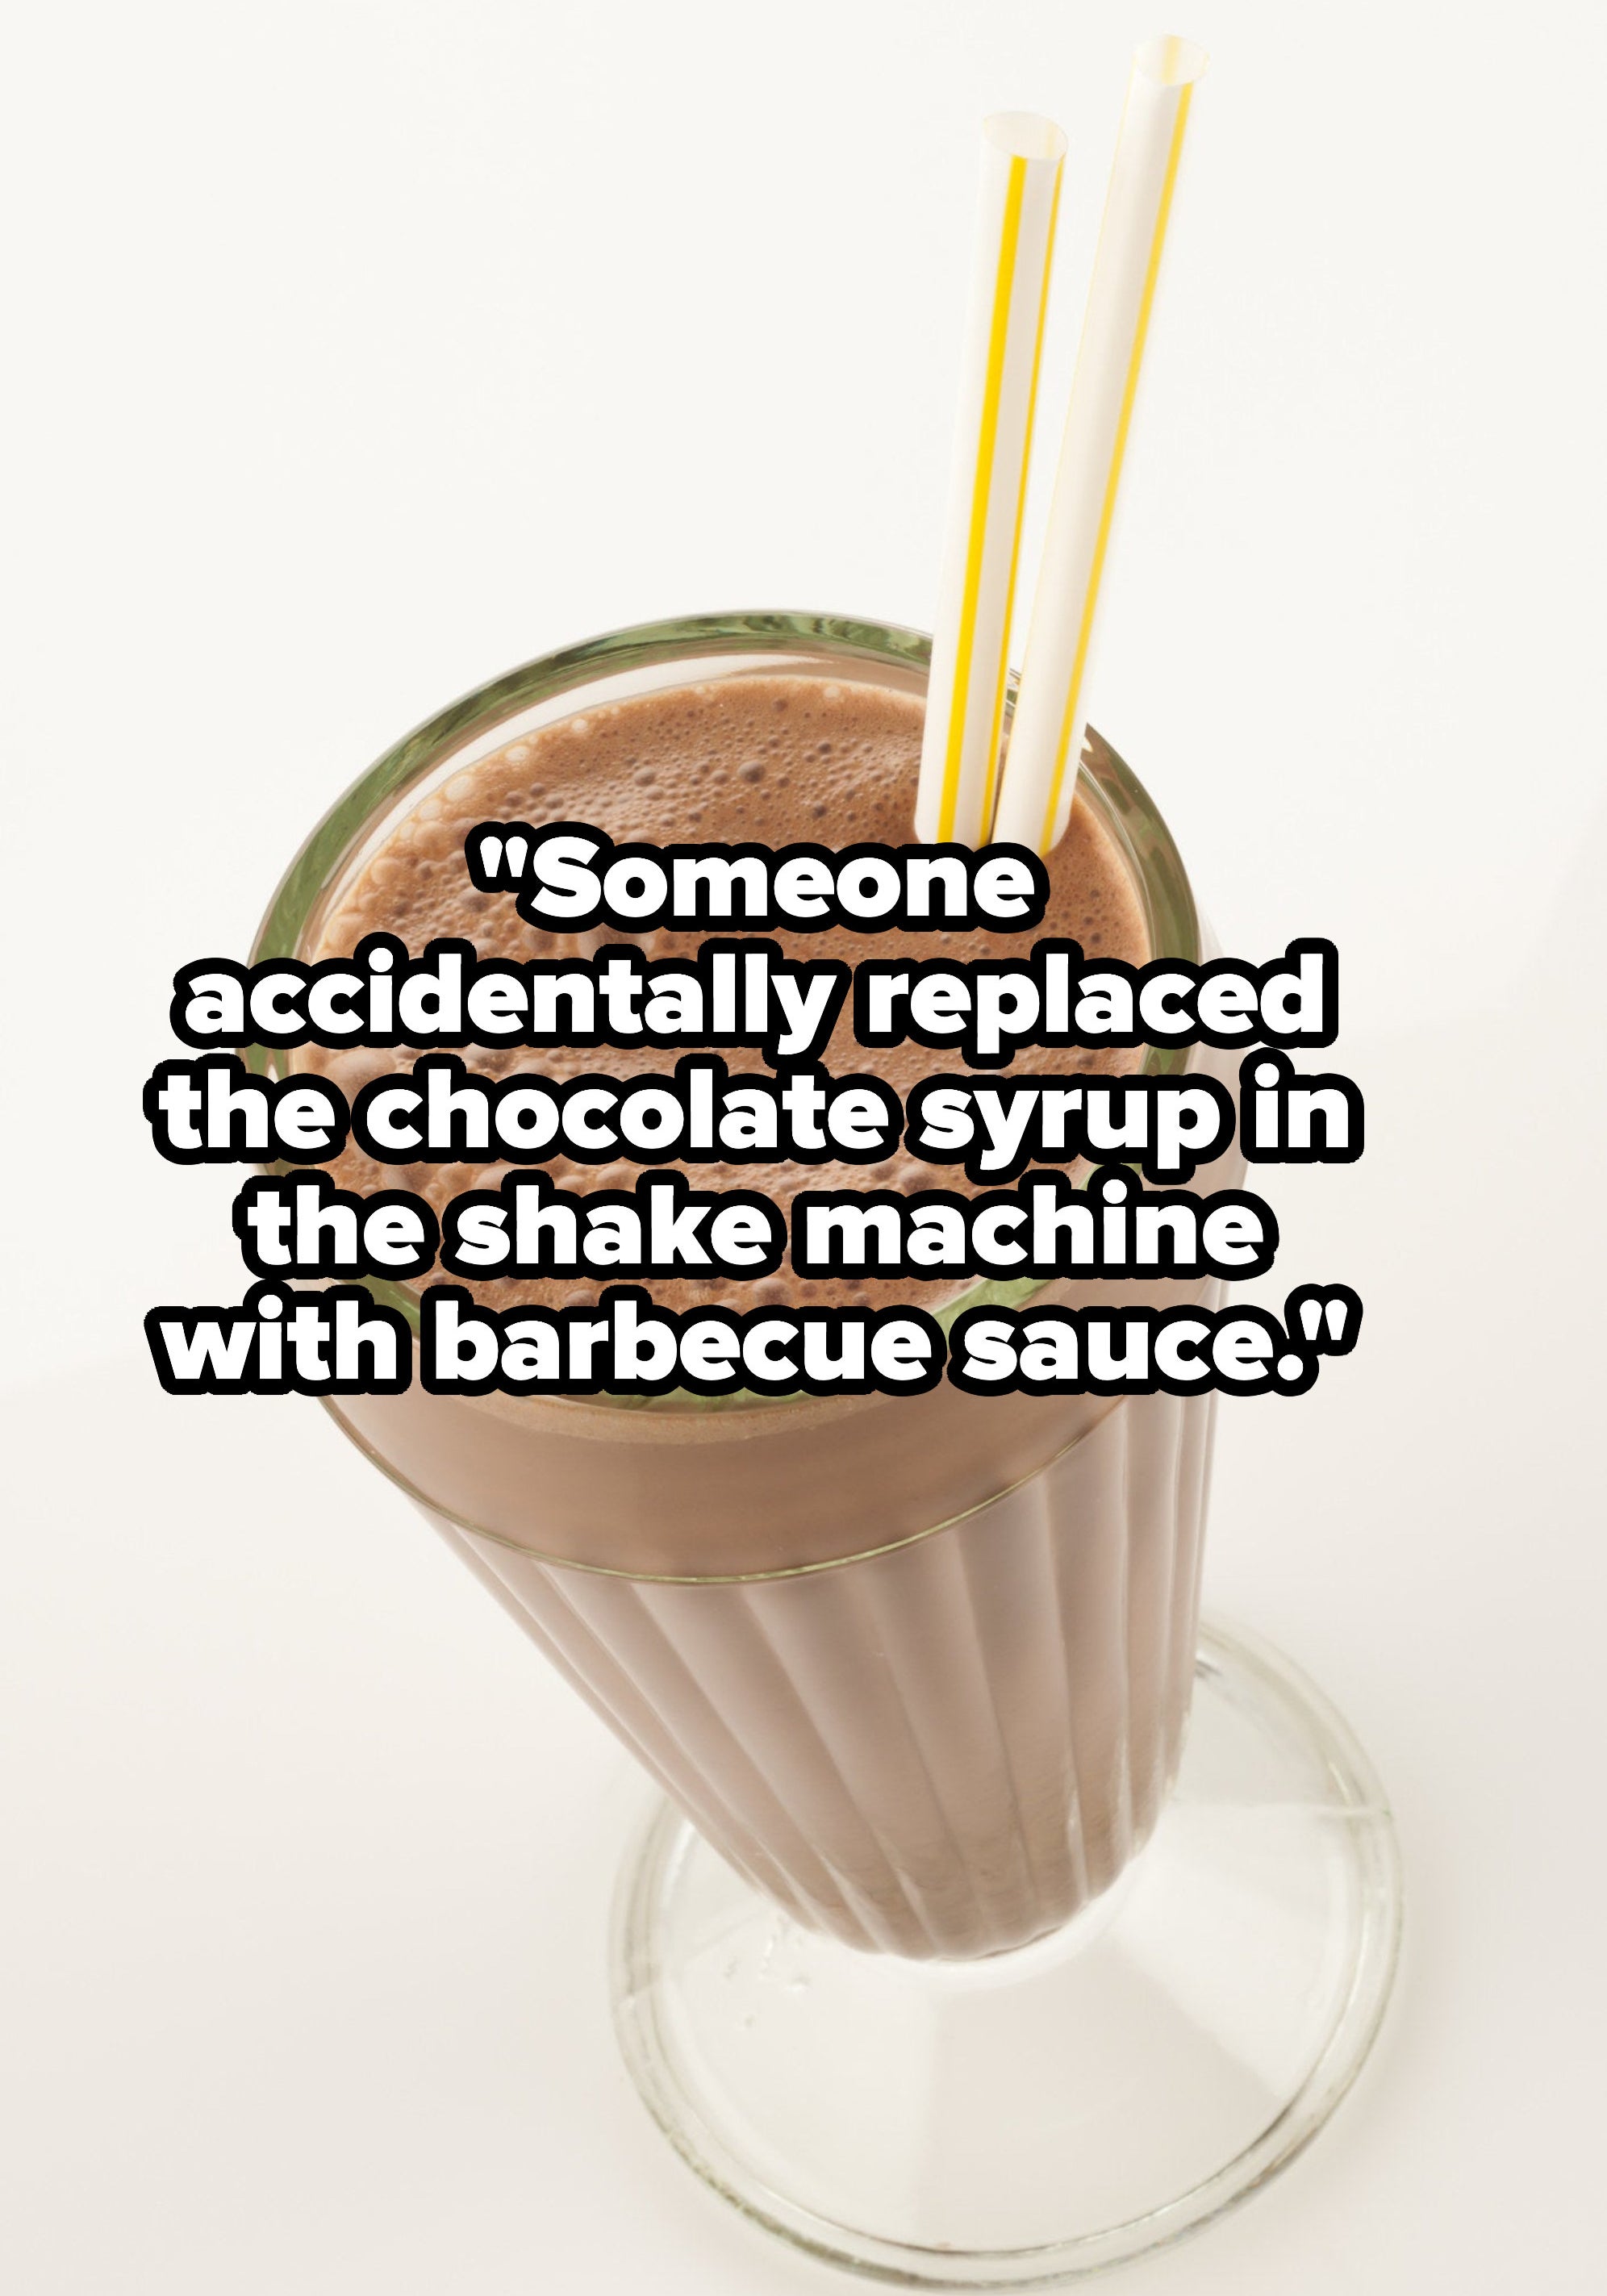 &quot;someone accidentally replaced the chocolate syrup in the shake machine with barbecue sauce&quot; over a chocolate shake